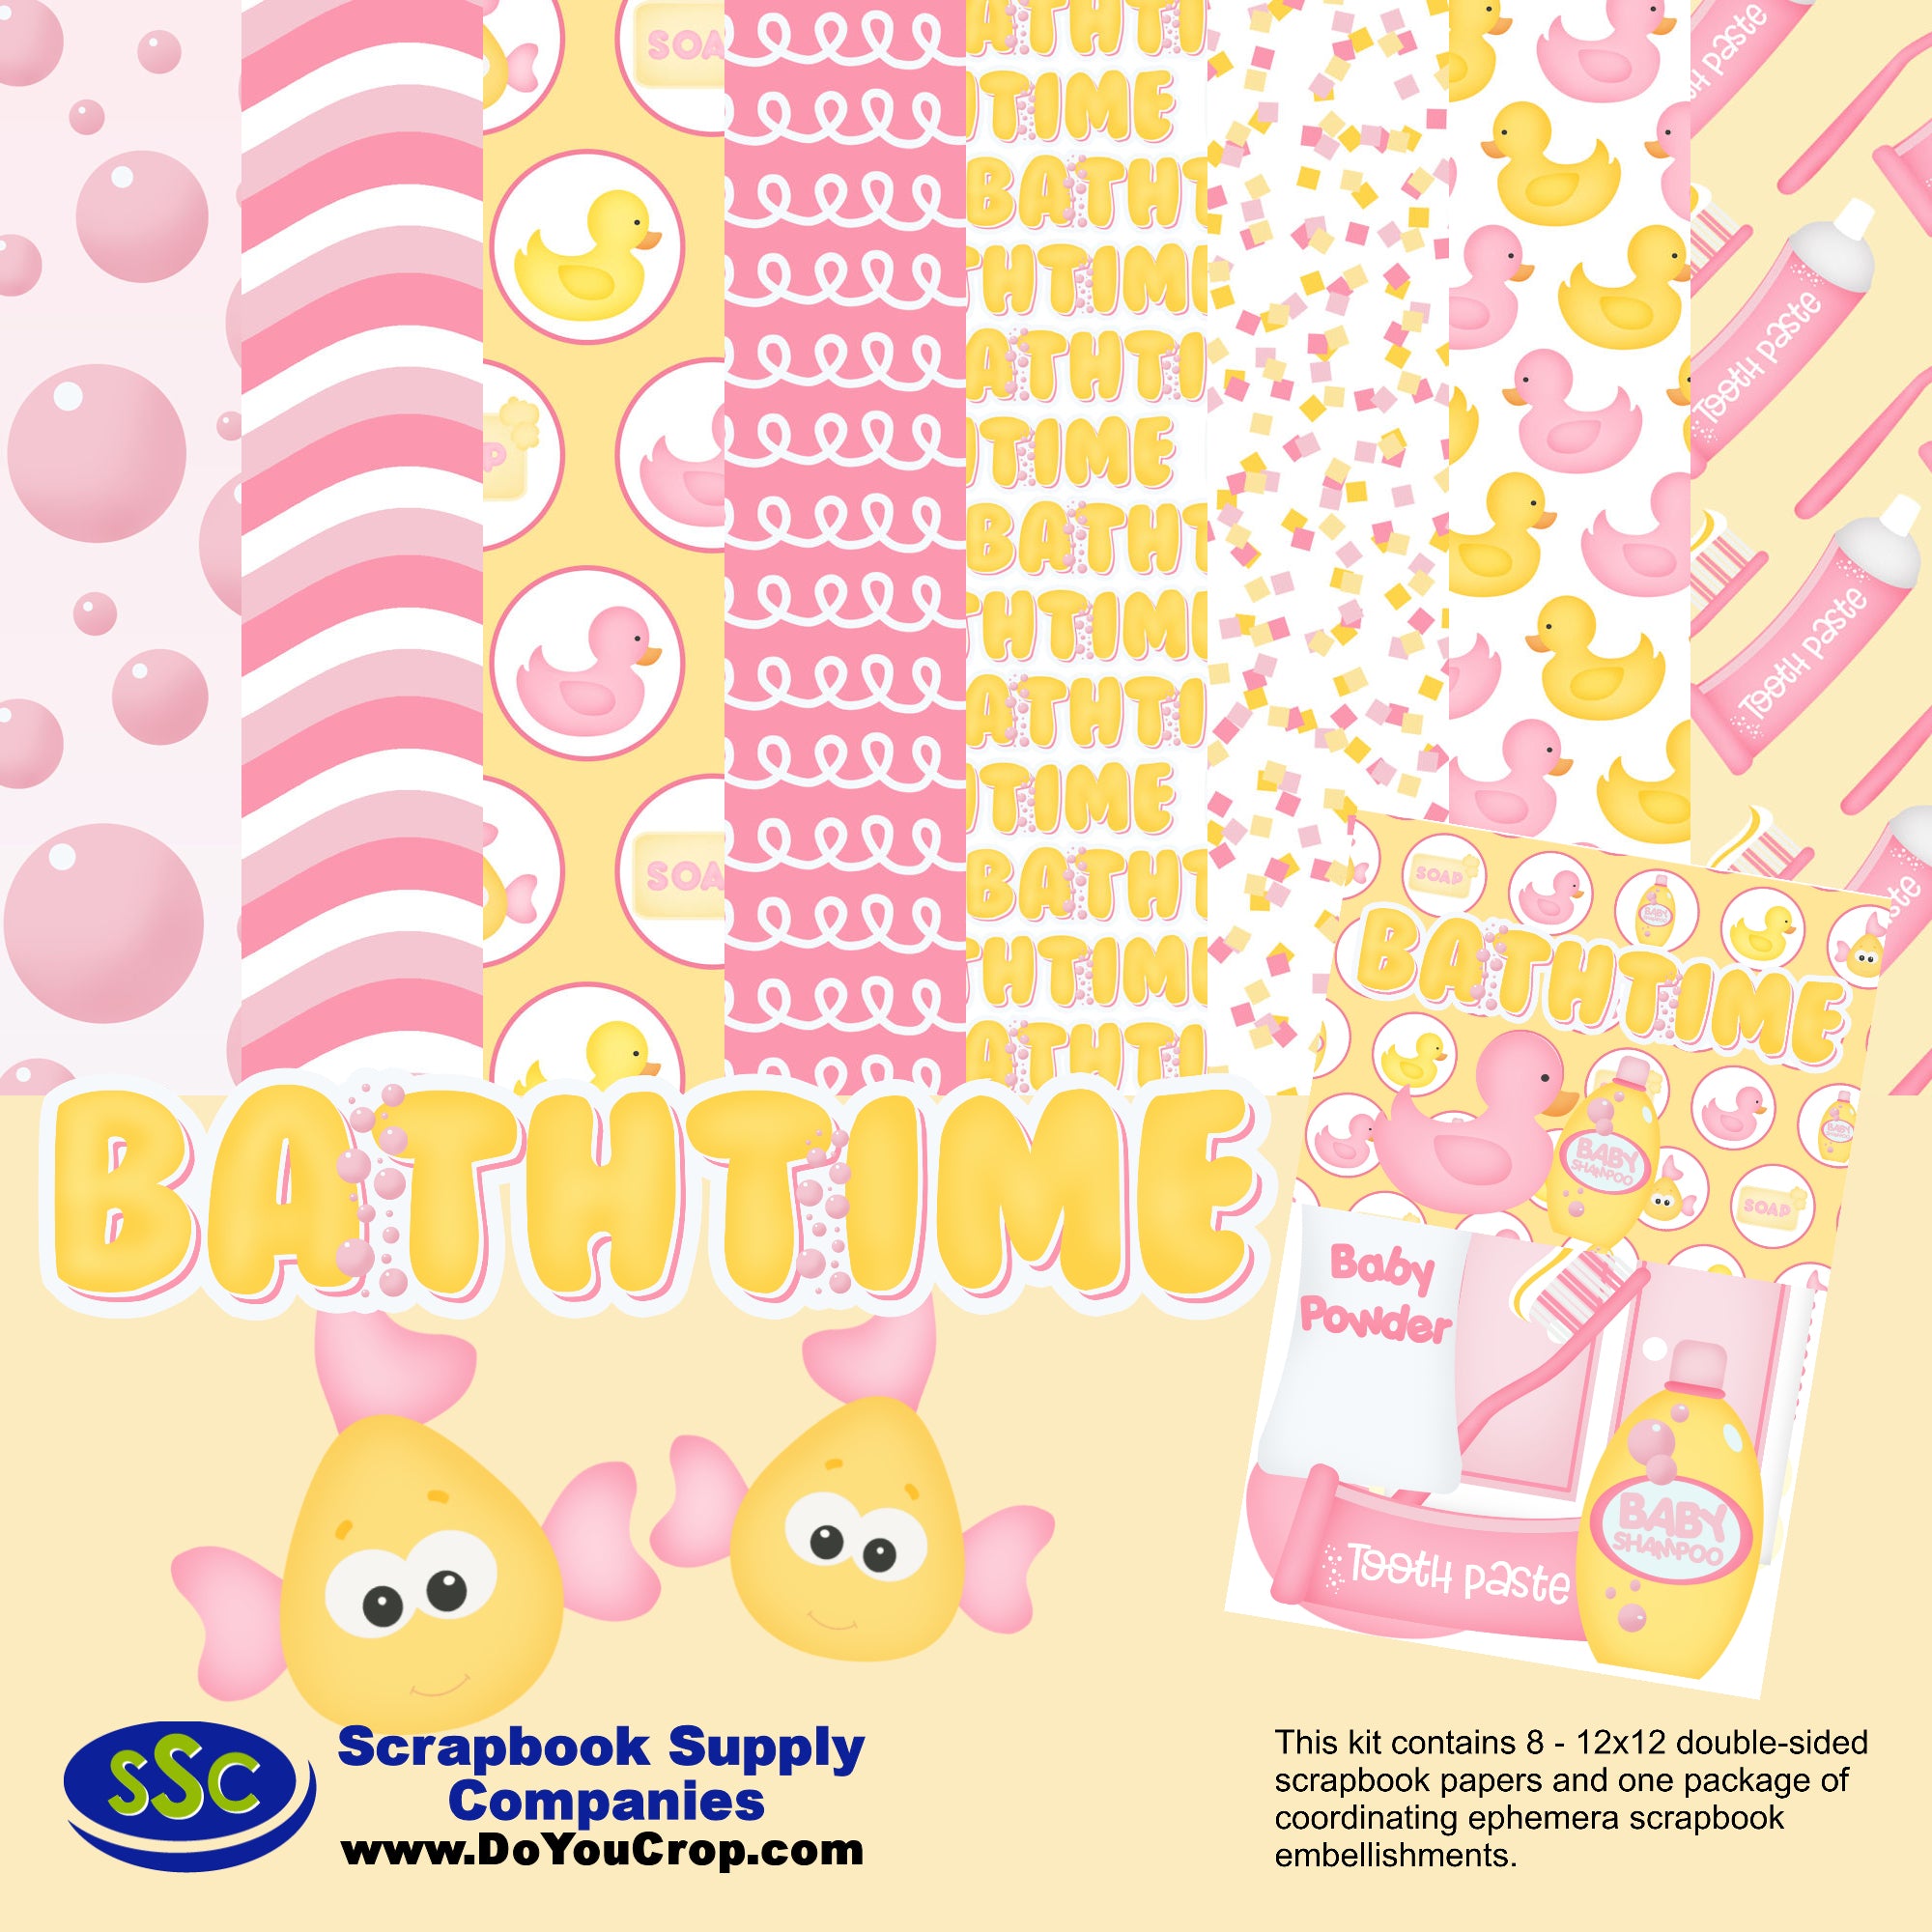 Bathtub Time Girl 12 x 12 Double-Sided Scrapbook Paper & Embellishment Kit by SSC Designs